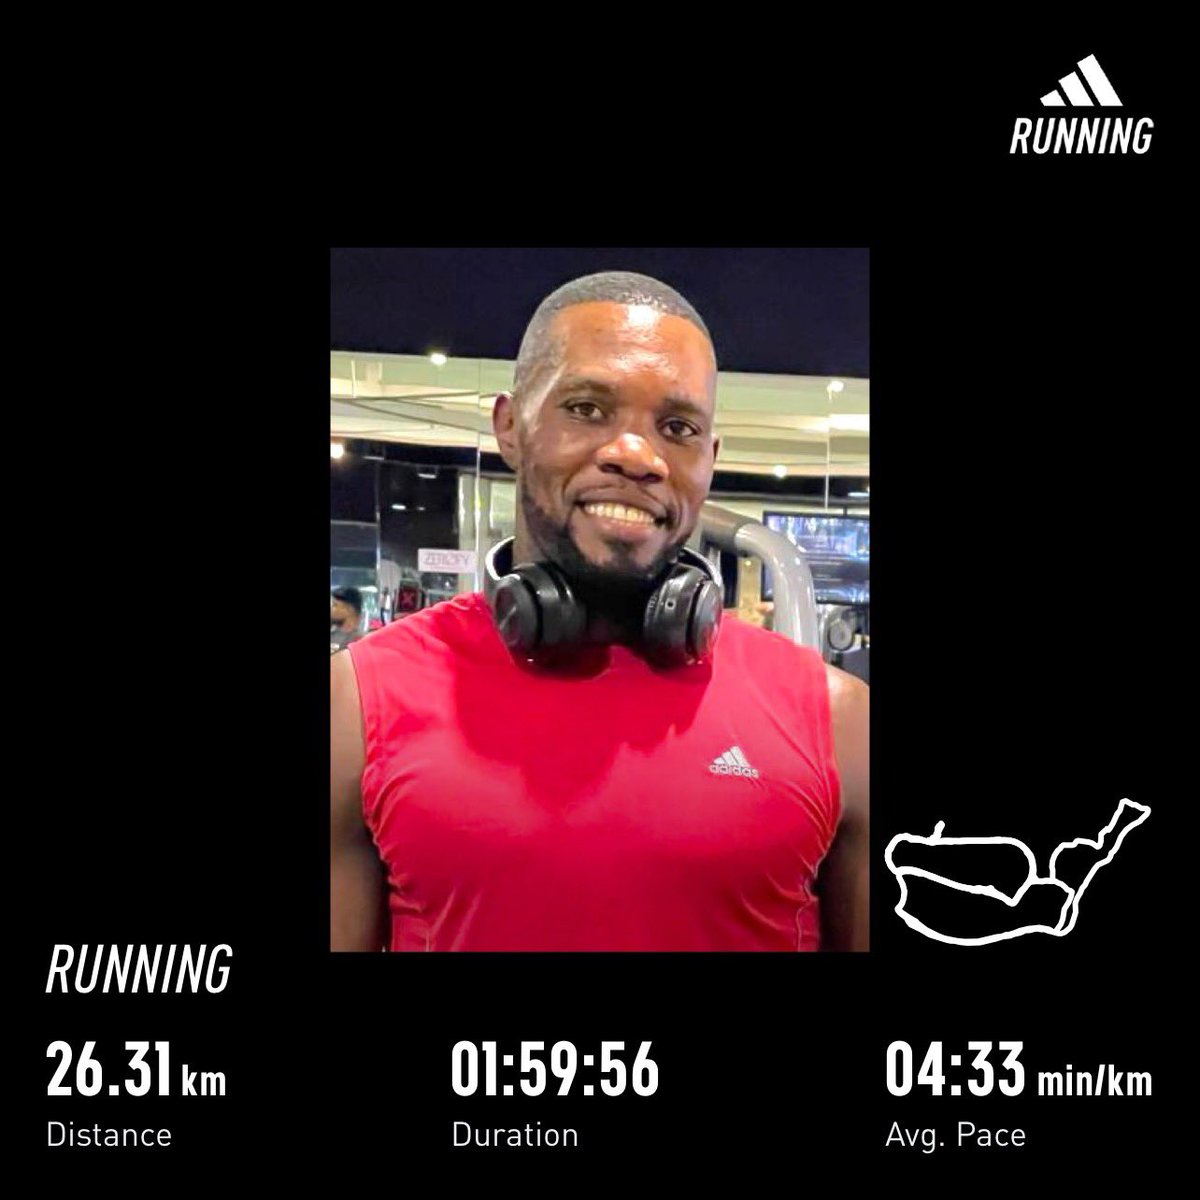 Keep going, and don't worry about your speed. You're making progress, even if it doesn't seem like it.
Forward is forward, no matter how slow.
#RunningWithSoleAC
#runningwithtumisole
#runwitharthurk
#nikerunning
#adidasruntastic
#runaddicted
#halfmarathon
#IPaintedMyRun…